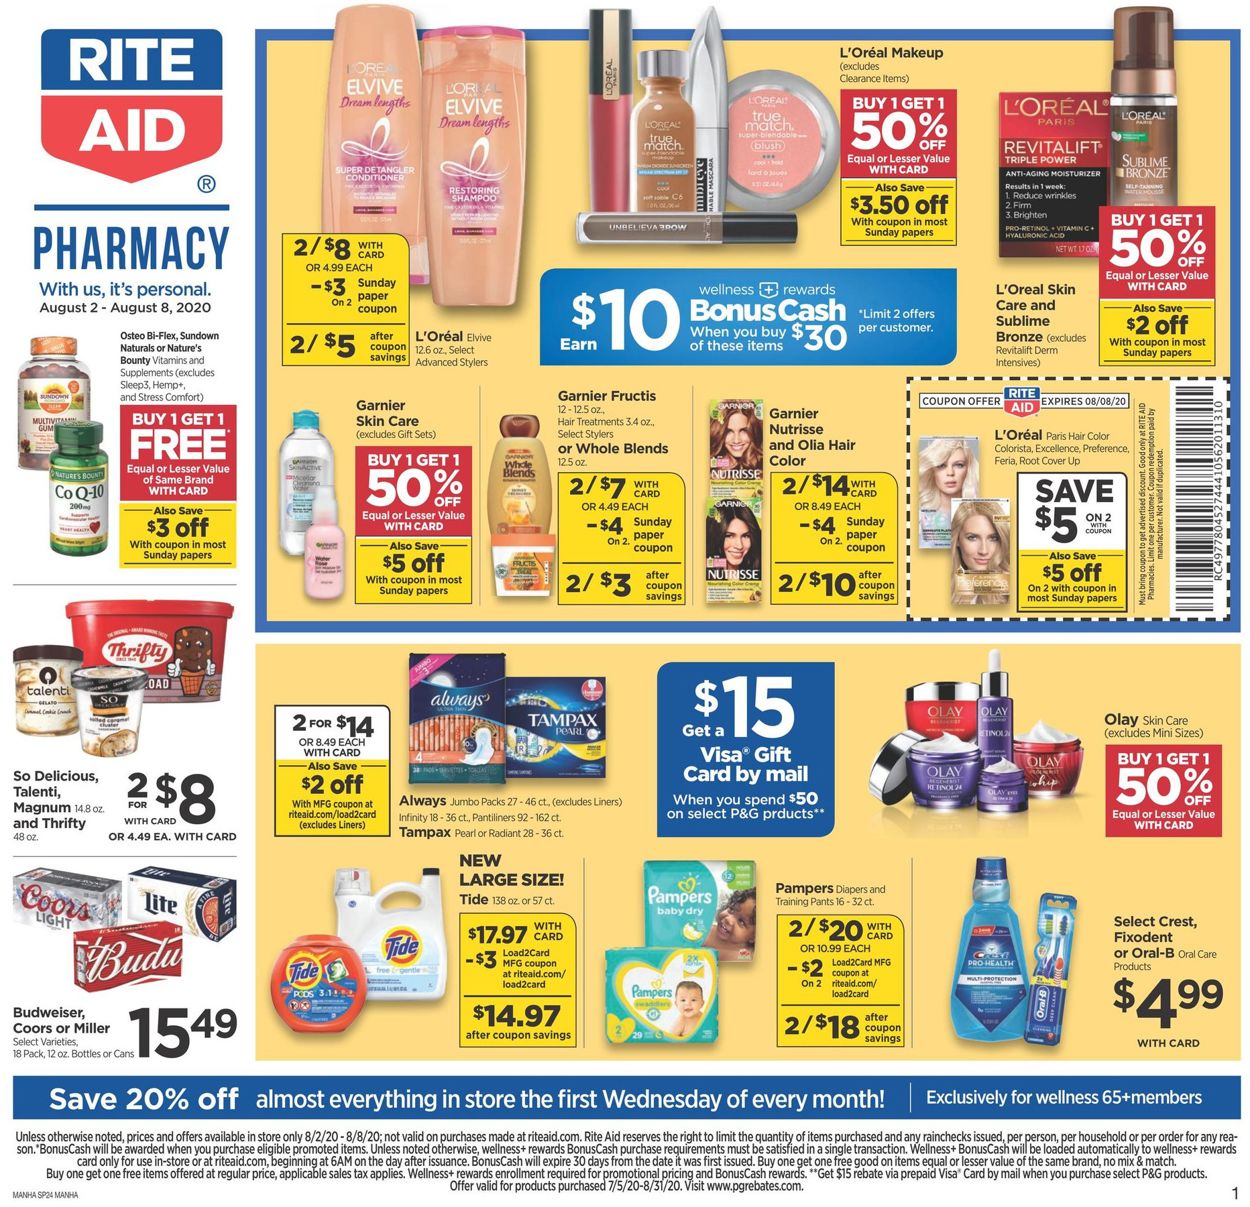 rite-aid-current-weekly-ad-08-02-08-08-2020-2-frequent-ads